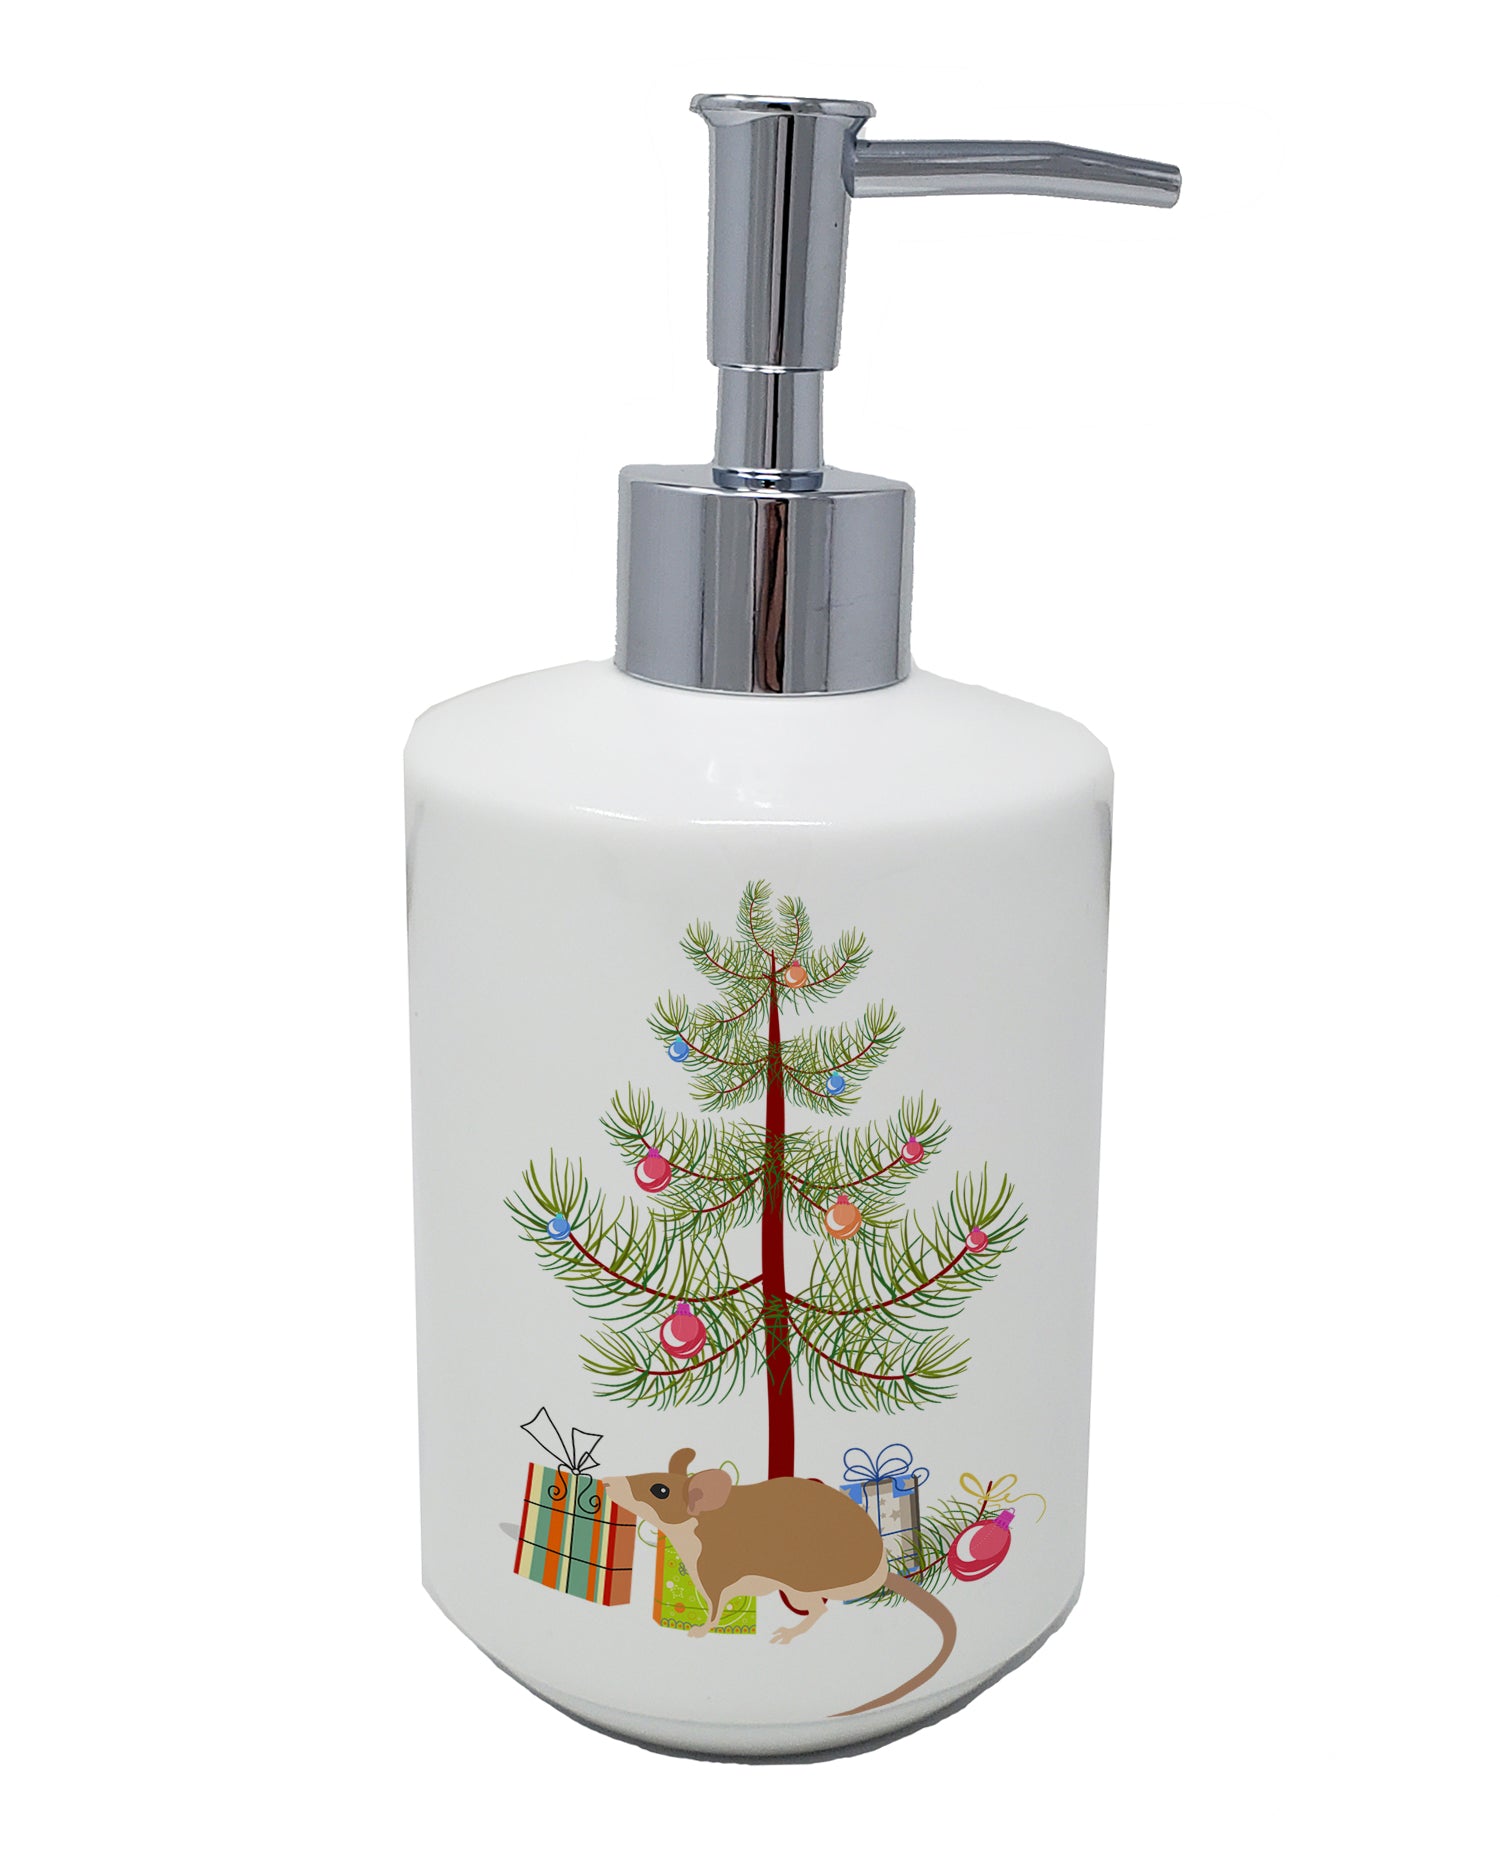 Buy this Spiny Mouse Merry Christmas Ceramic Soap Dispenser